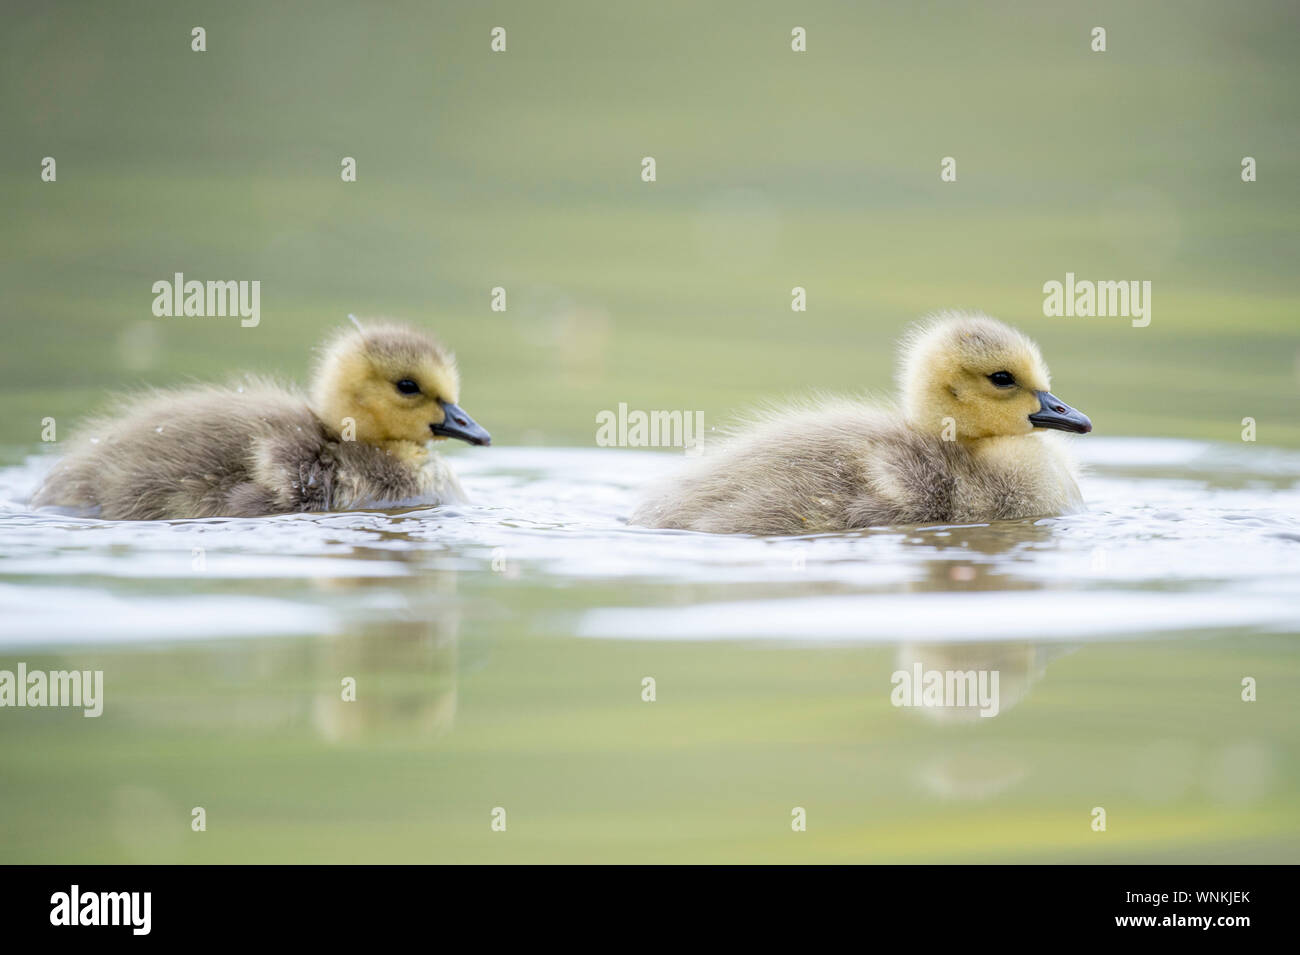 Cute and fuzzy Canada Goslings swim in the calm water on an overcast day with soft light. Stock Photo